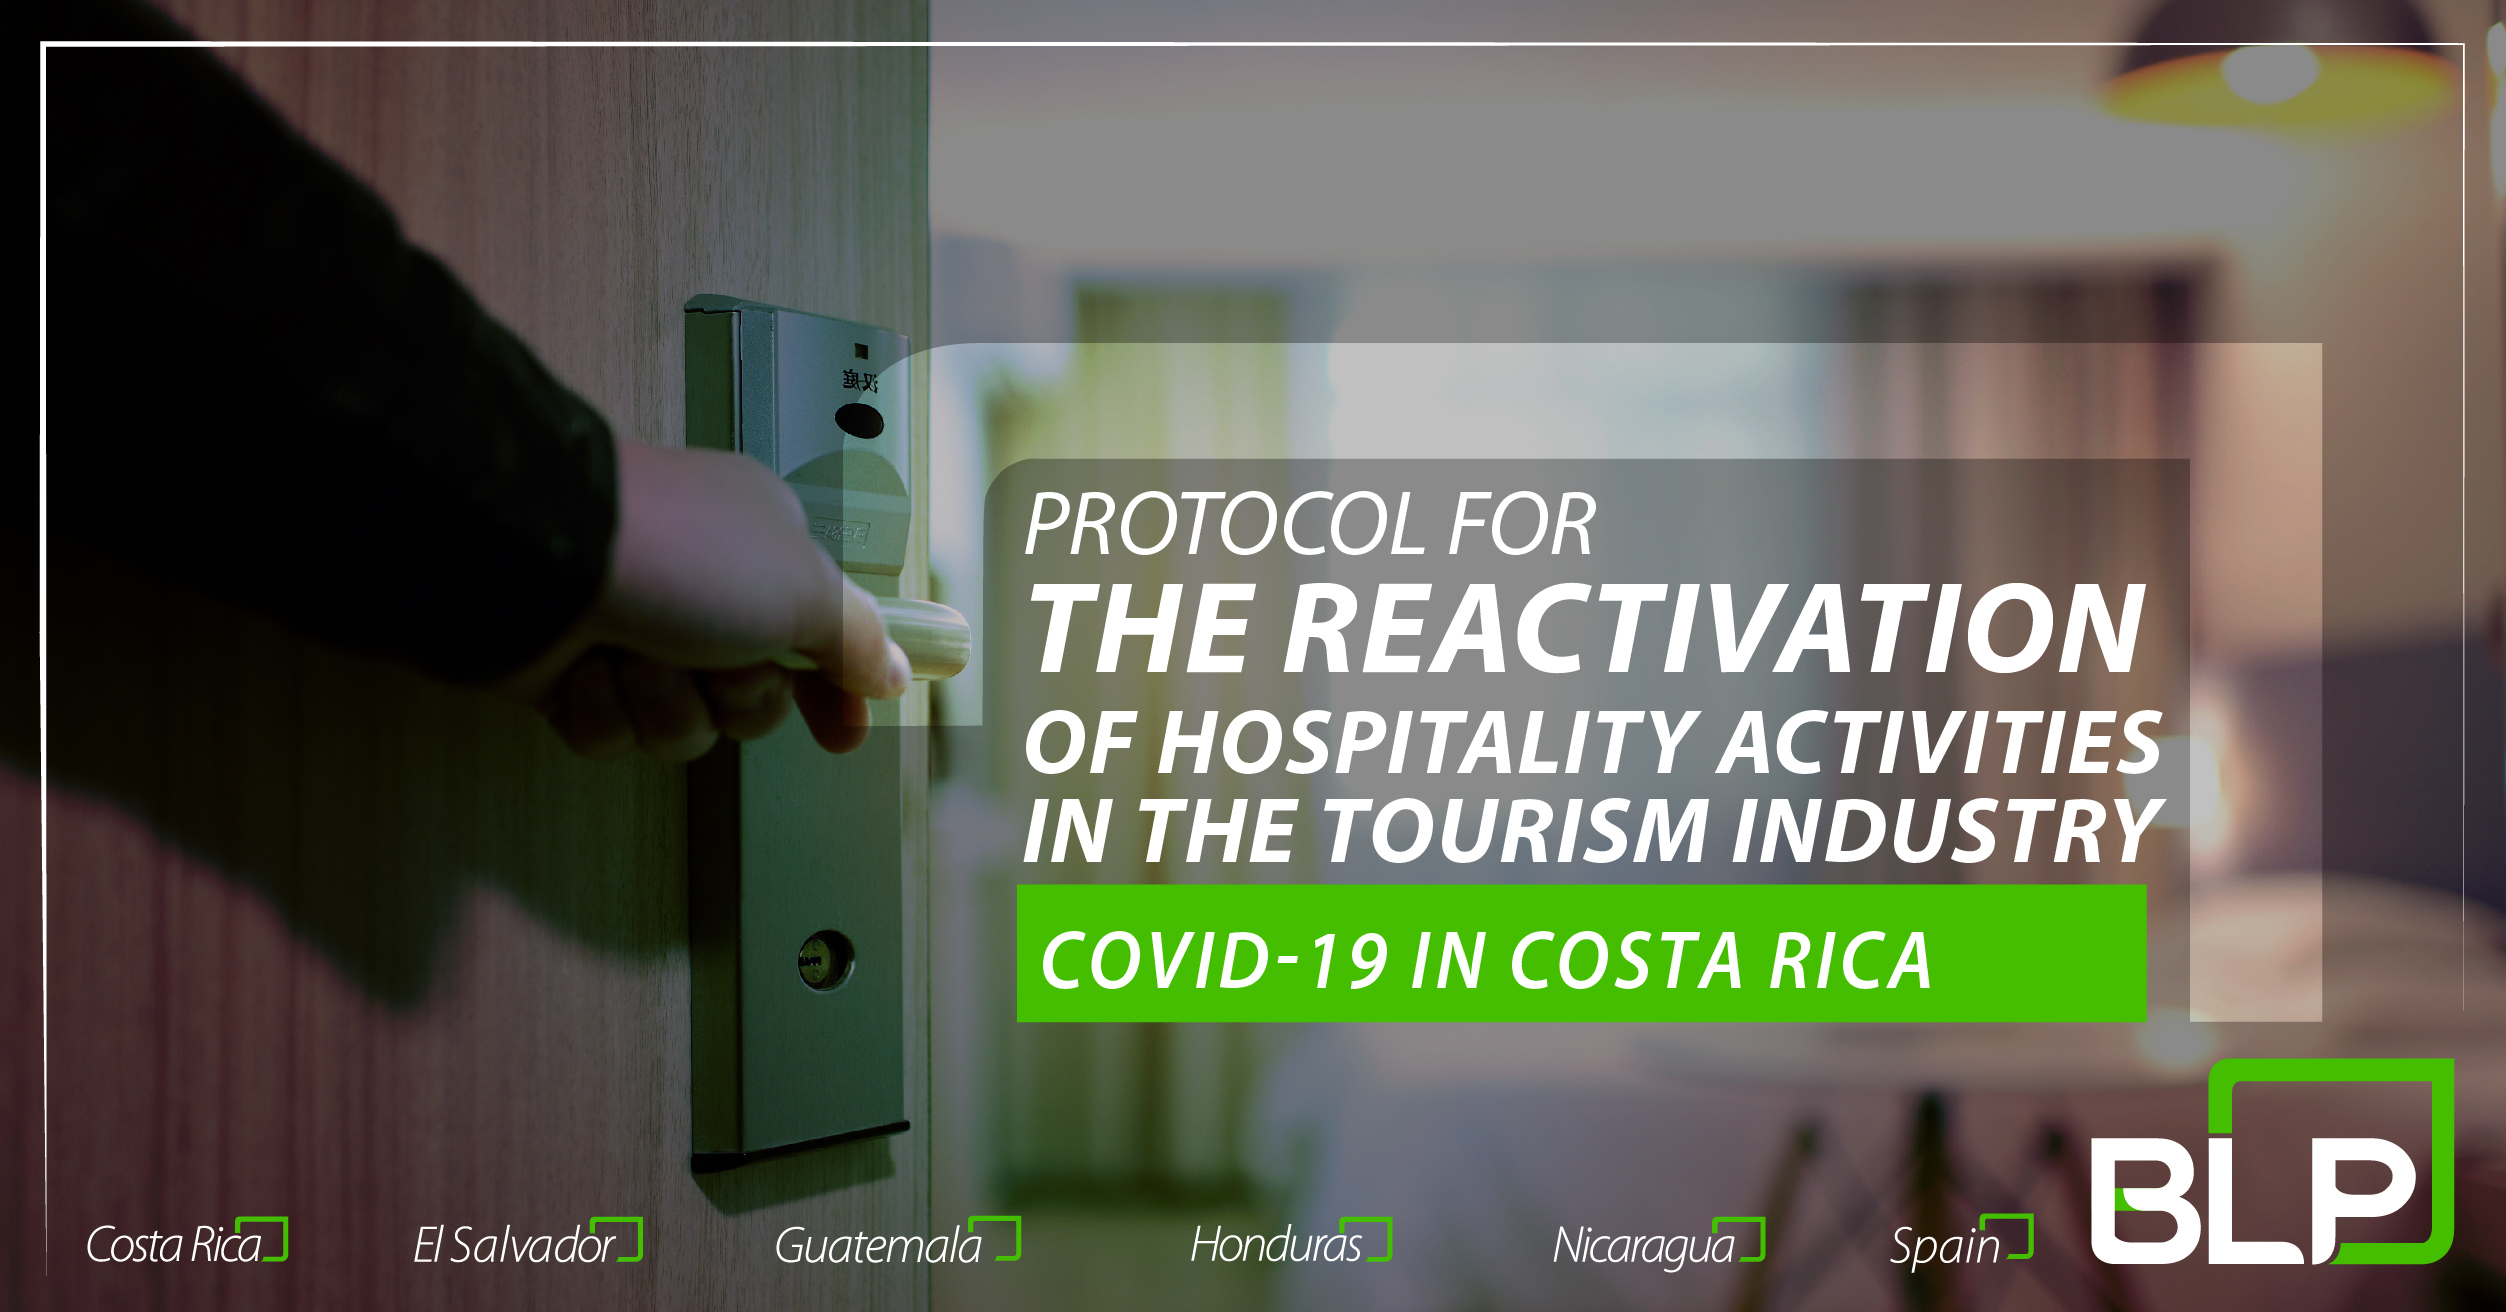 Protocol for Hospitality Activities in the Tourism Industry